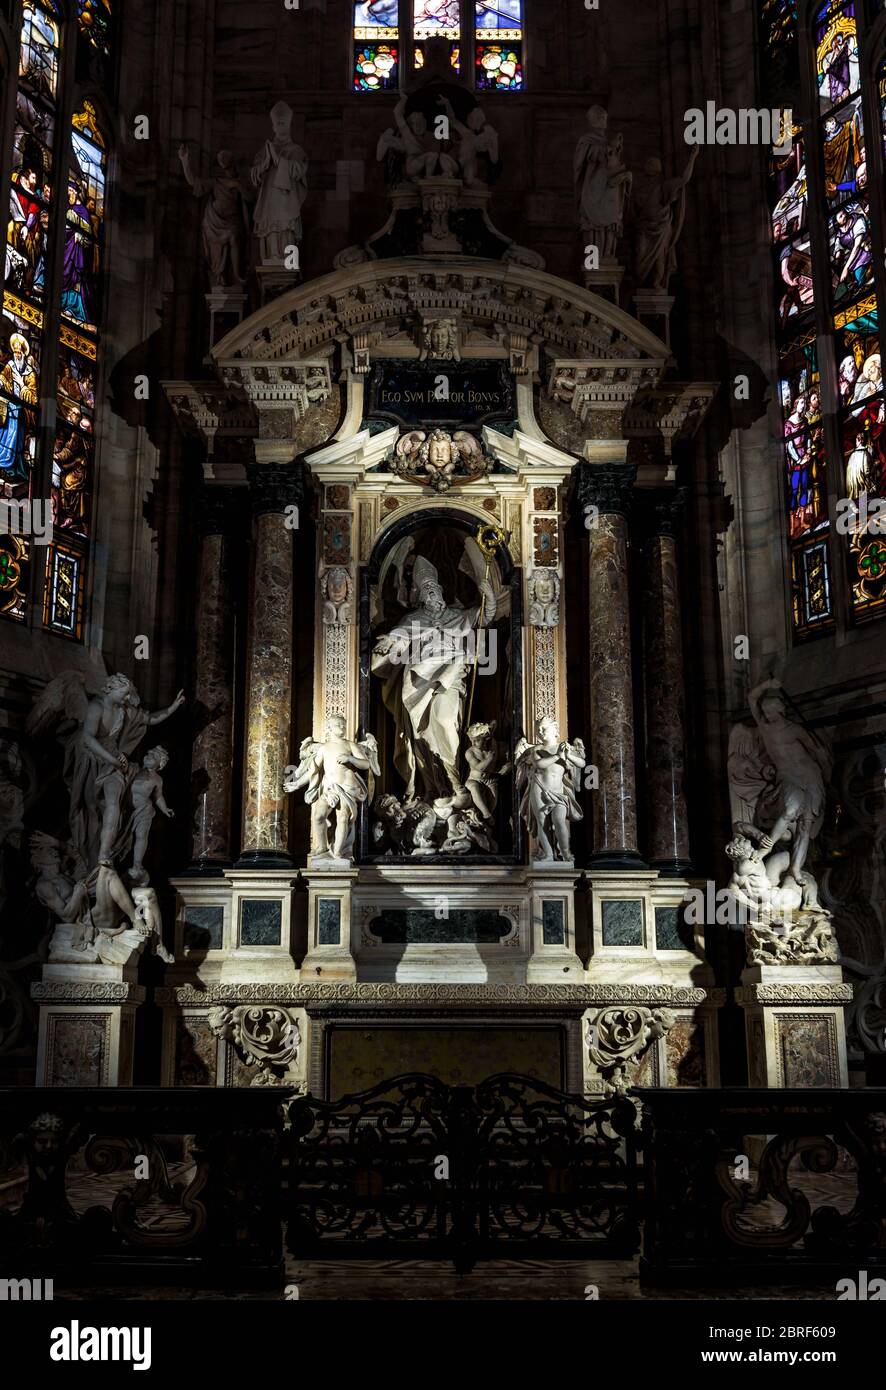 Milan, Italy - May 16, 2017: Altar of Saint John the Good in the Milan Cathedral (Duomo di Milano). Milan Duomo is the largest church in Italy and the Stock Photo